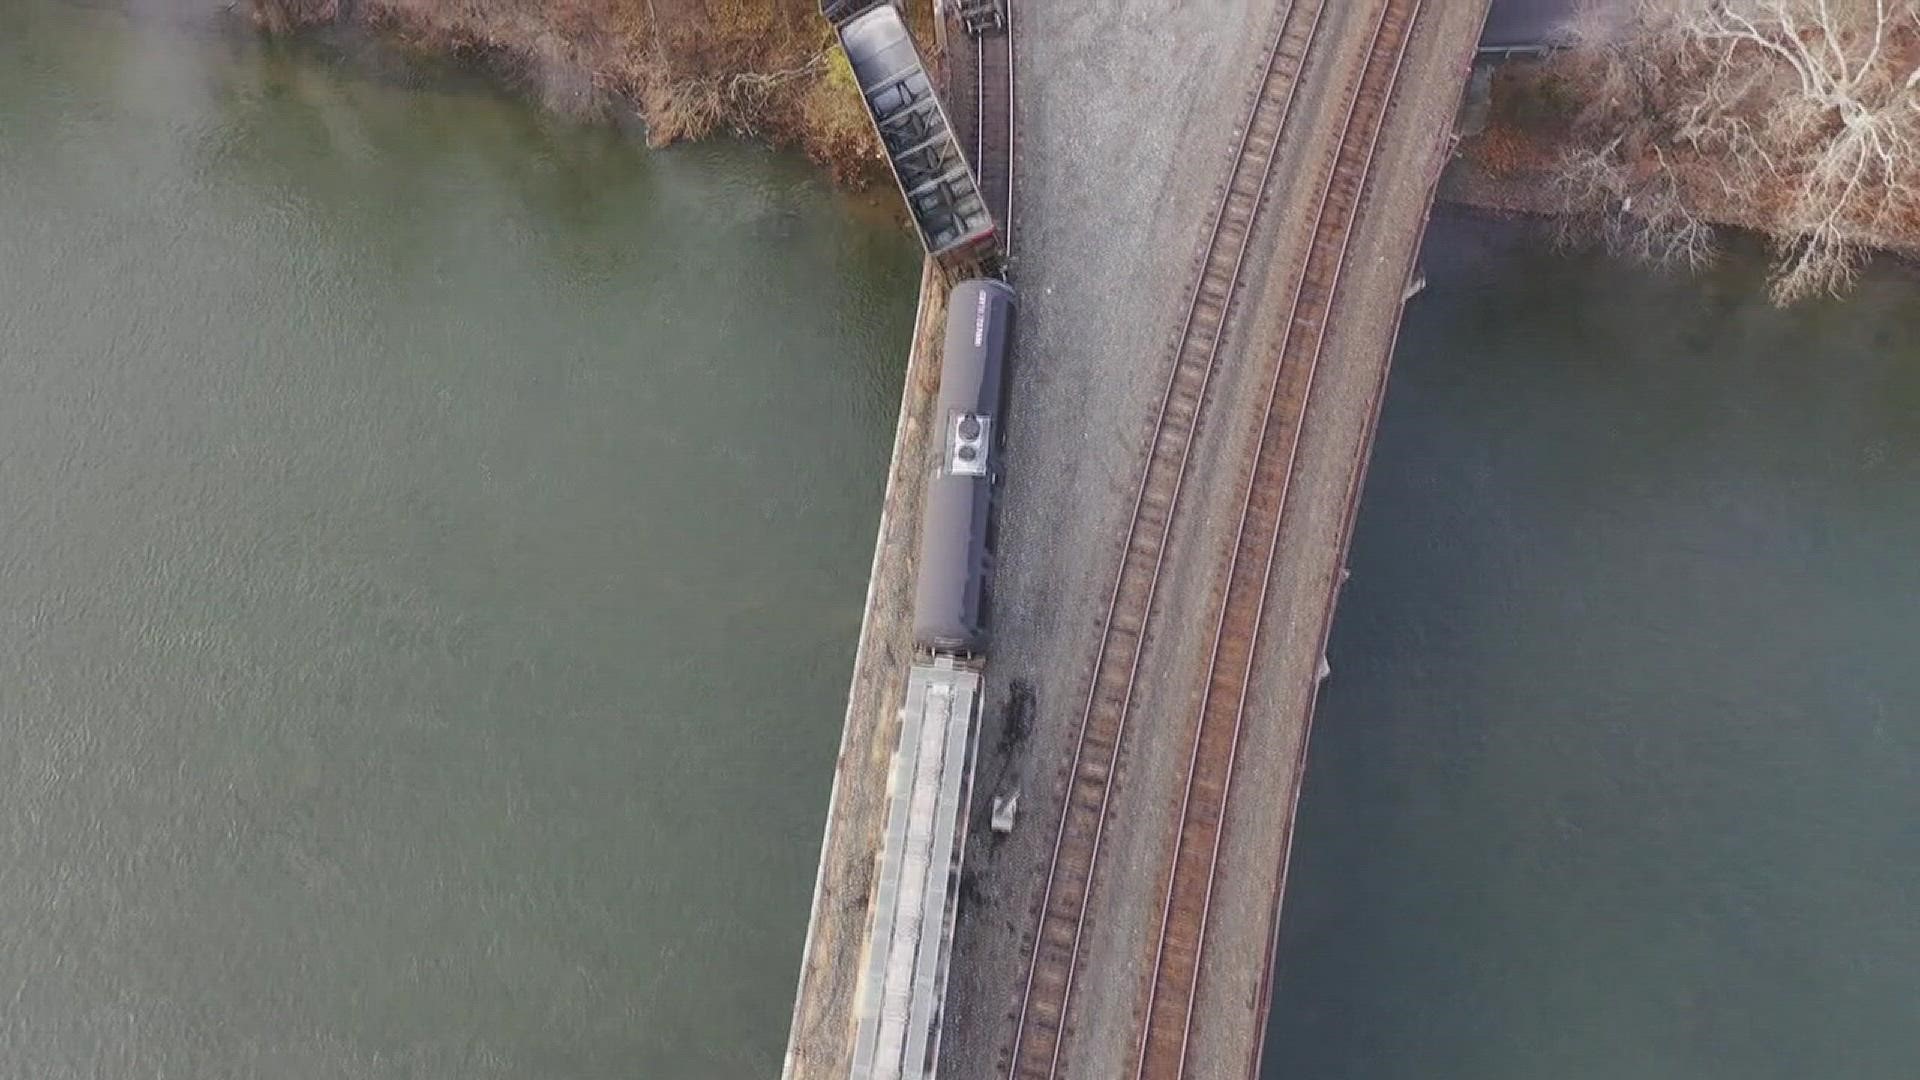 The derailment on the Rockville Bridge has closed S. Main St. in Marysville, according to emergency dispatch.